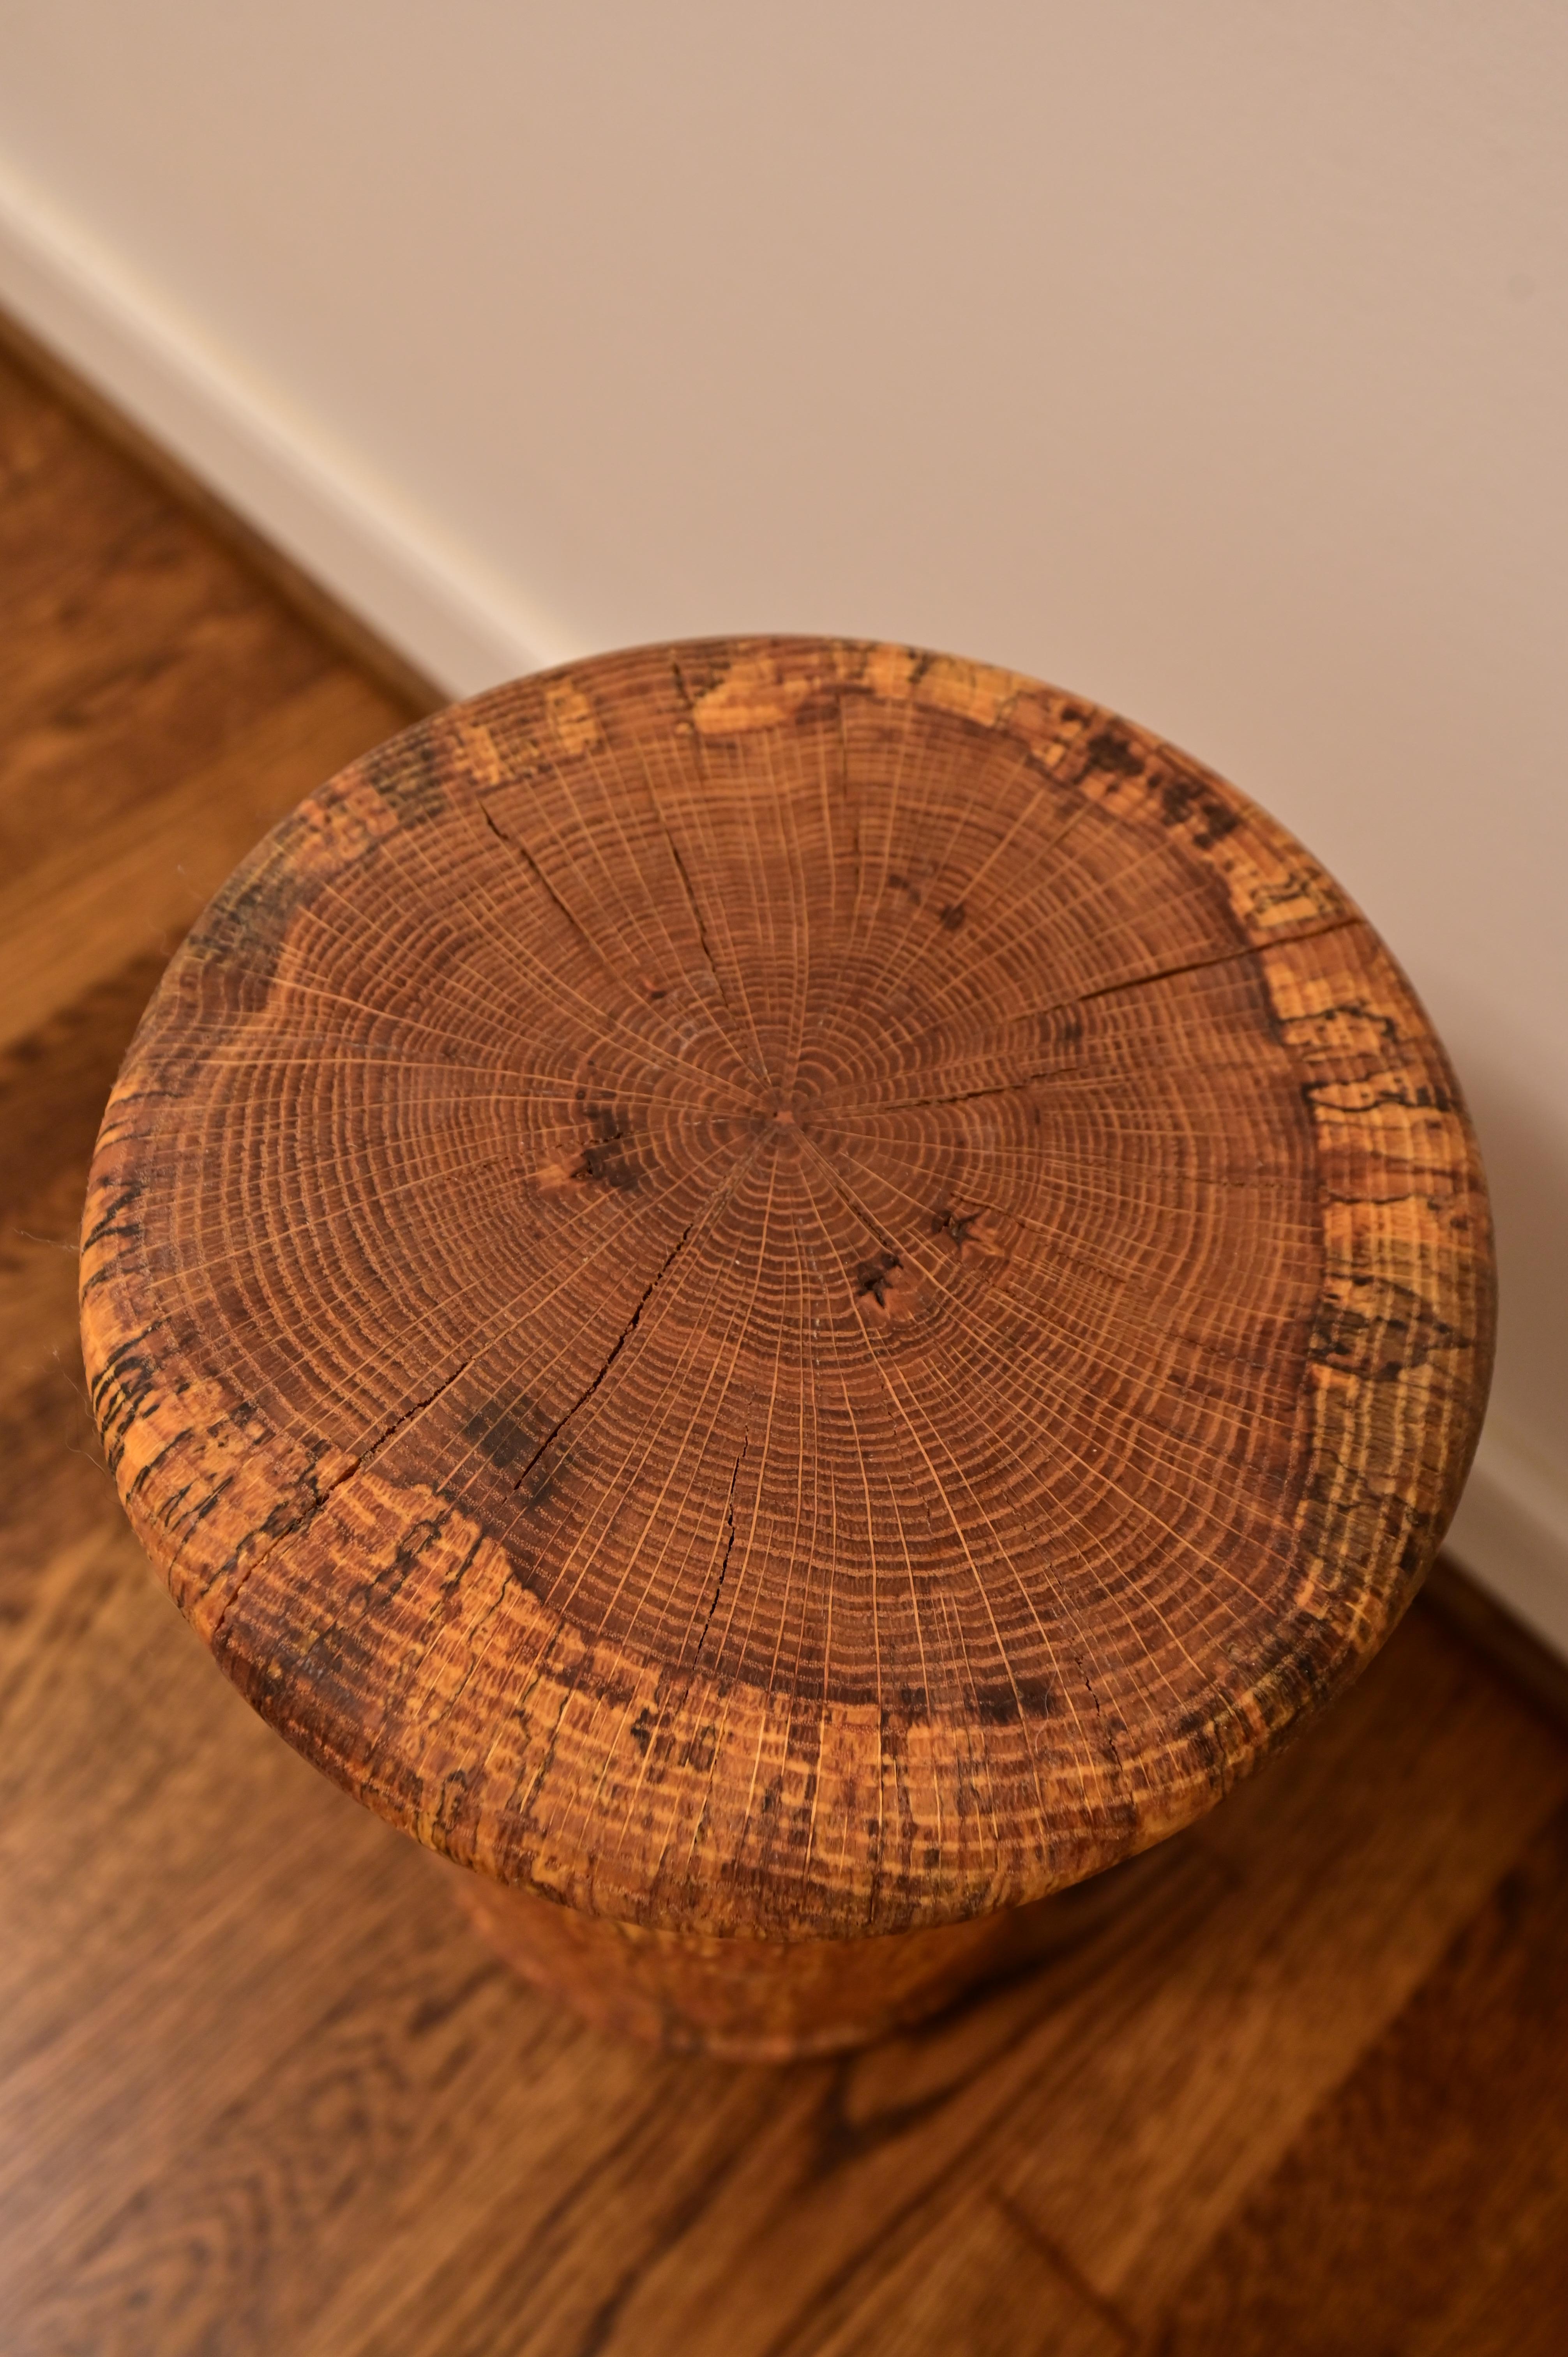 Hand carved end table from solid oak, original design. Brand new item made by the artist. Has large natural knot  as pictured. Organic and food safe wood finish, raw linseed oil. 9' diameter, 15